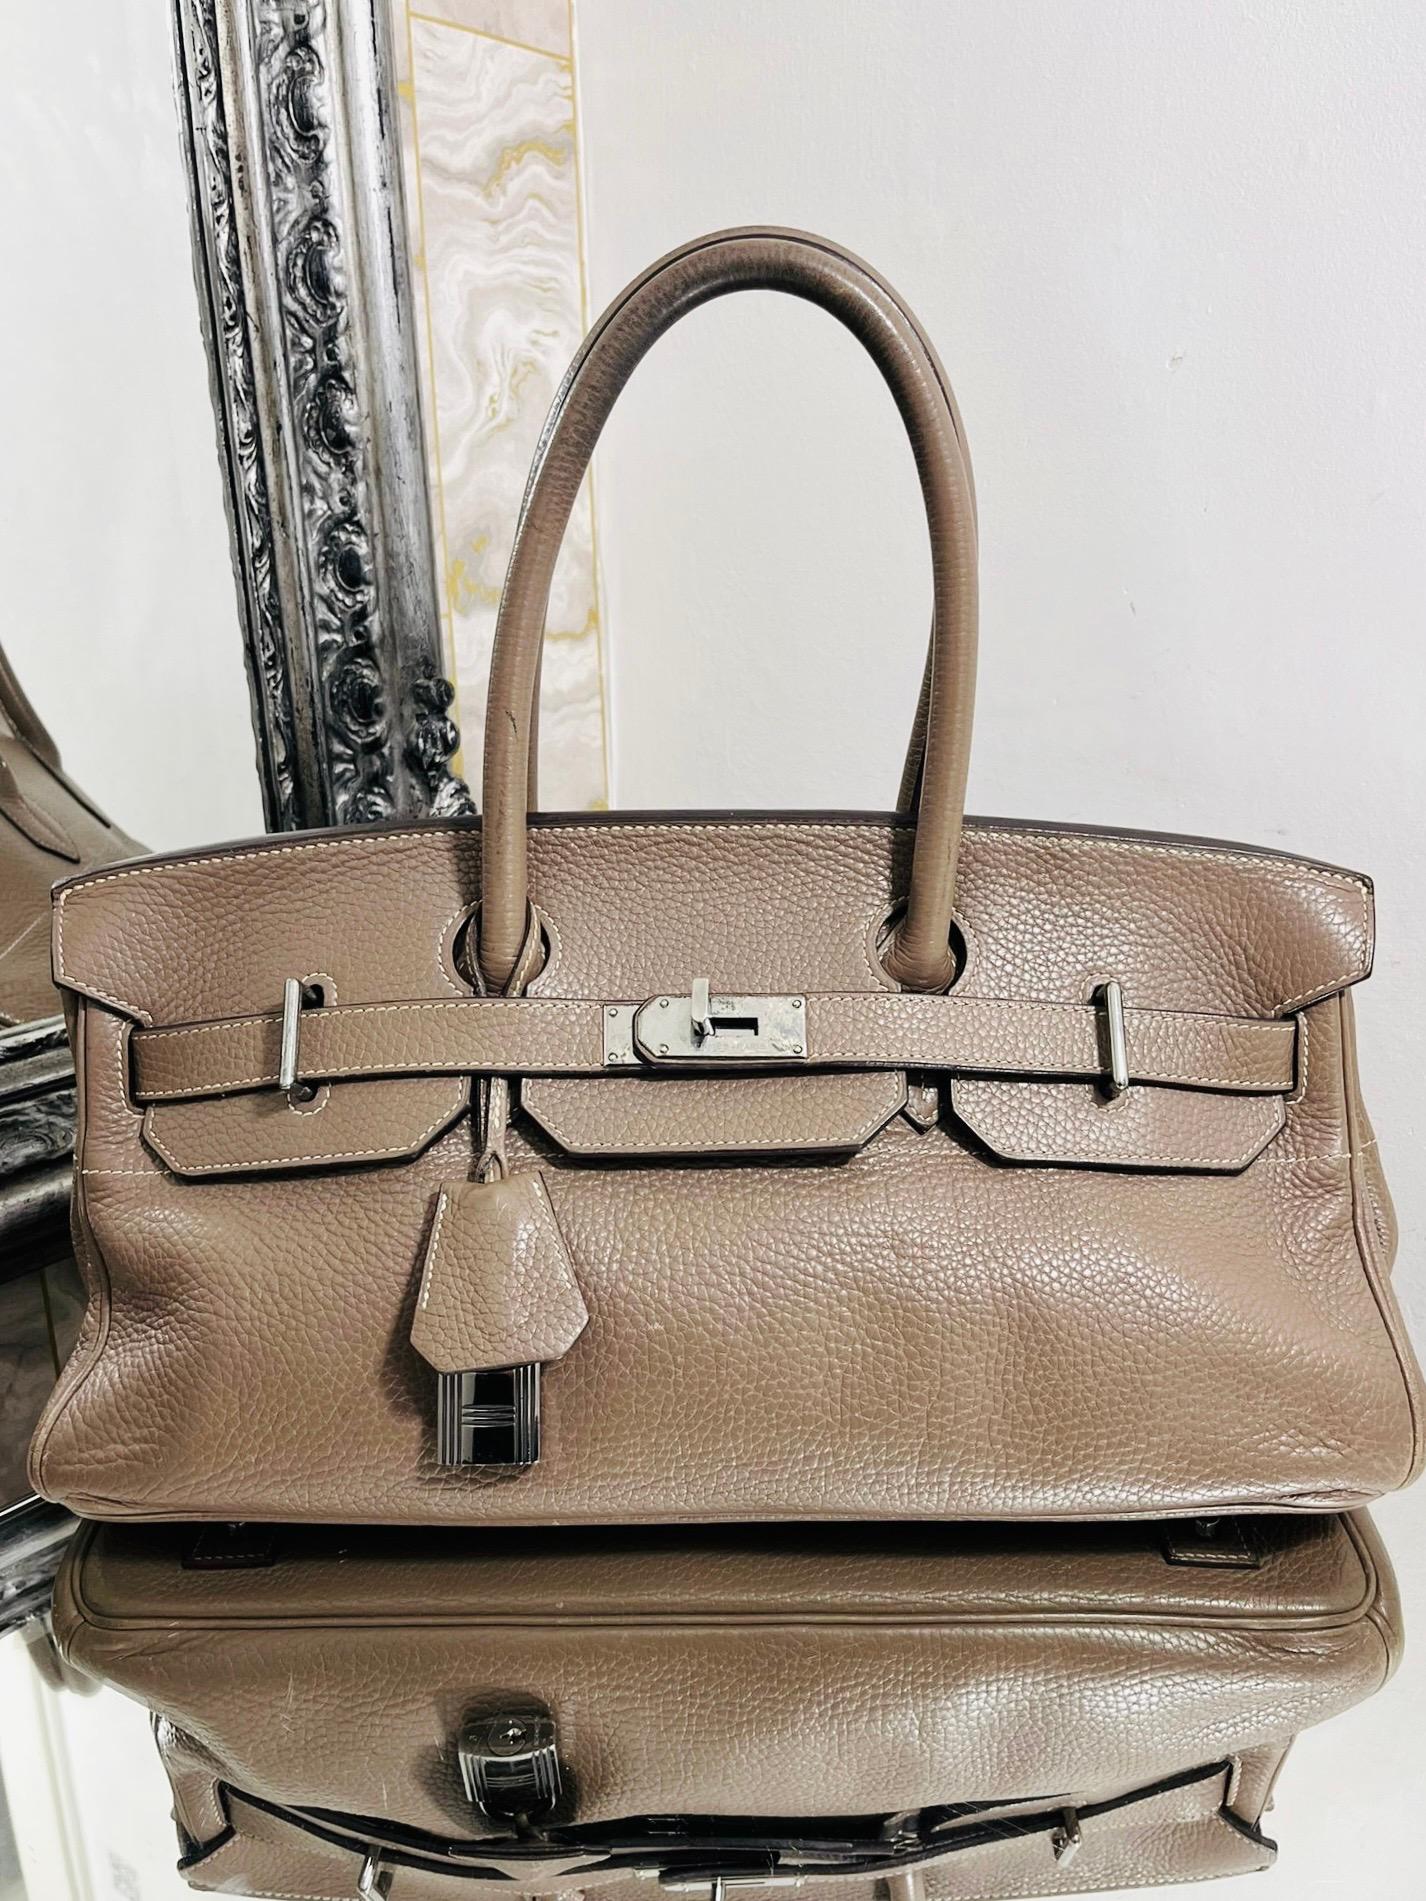 Hermes Jean Paul Gaultier Birkin 42cm Bag

Shoulder version of the iconic Birkin bag designed by Jean Paul Gaultier.

Taupe colour with palladium hardware, to include clochette, padlock and keys.

Size - Height 19cm , Width 42cm, Depth